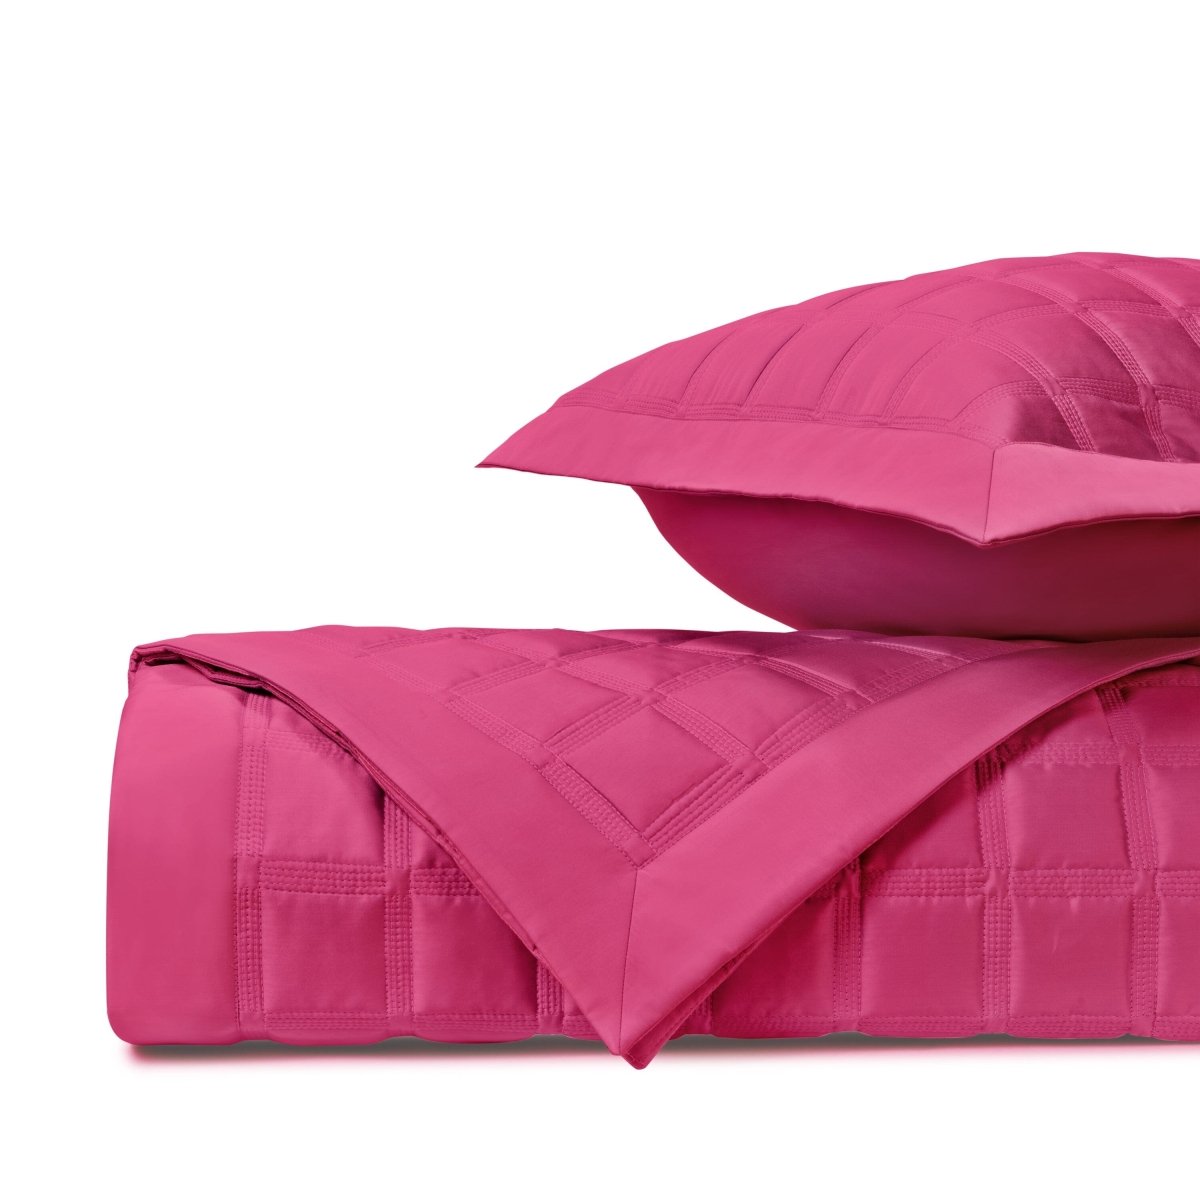 ATHENS Quilted Coverlet in Bright Pink by Home Treasures at Fig Linens and Home